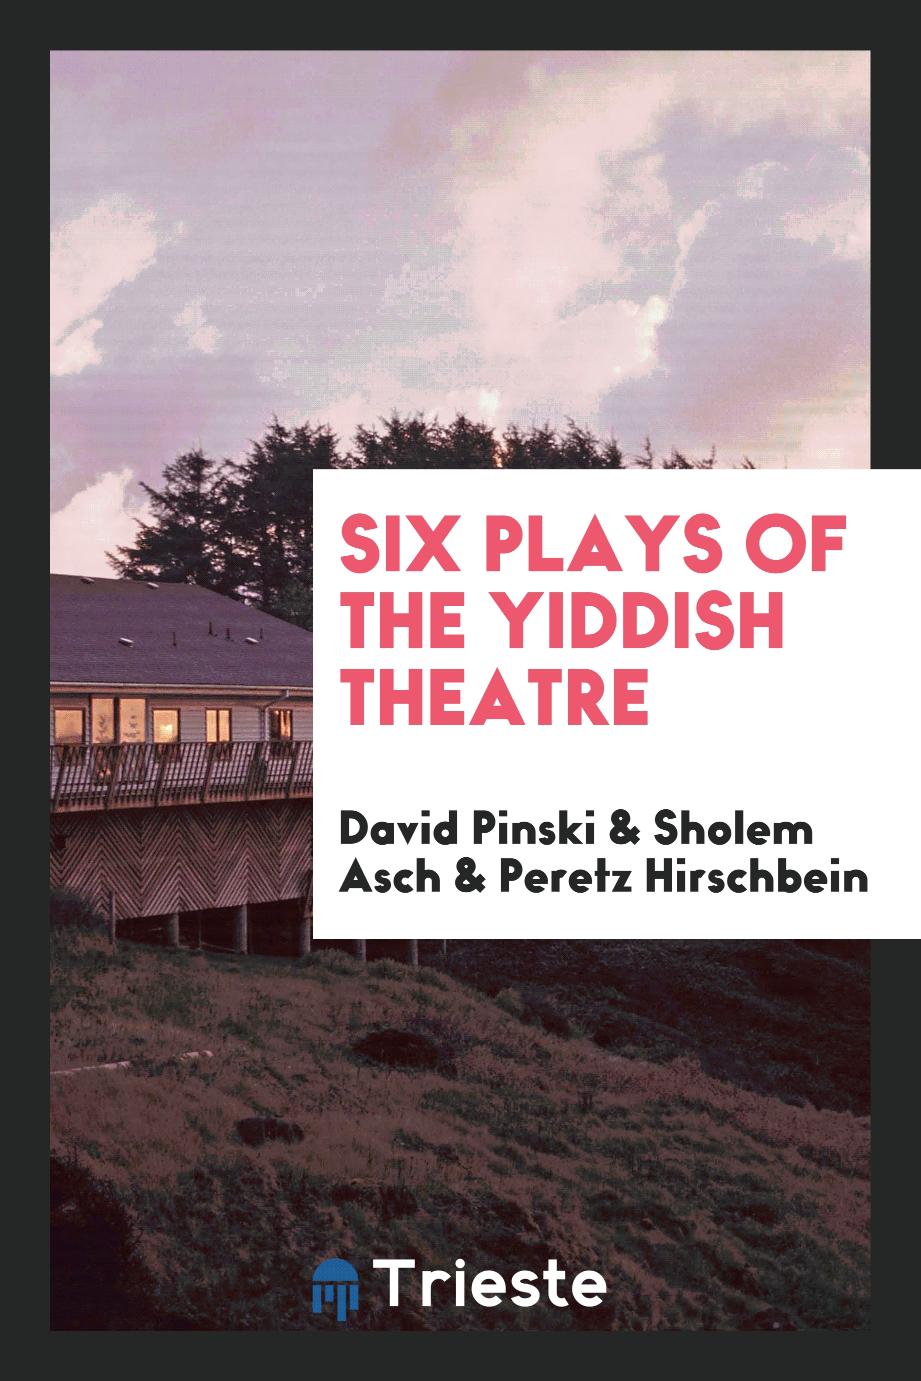 Six plays of the Yiddish theatre